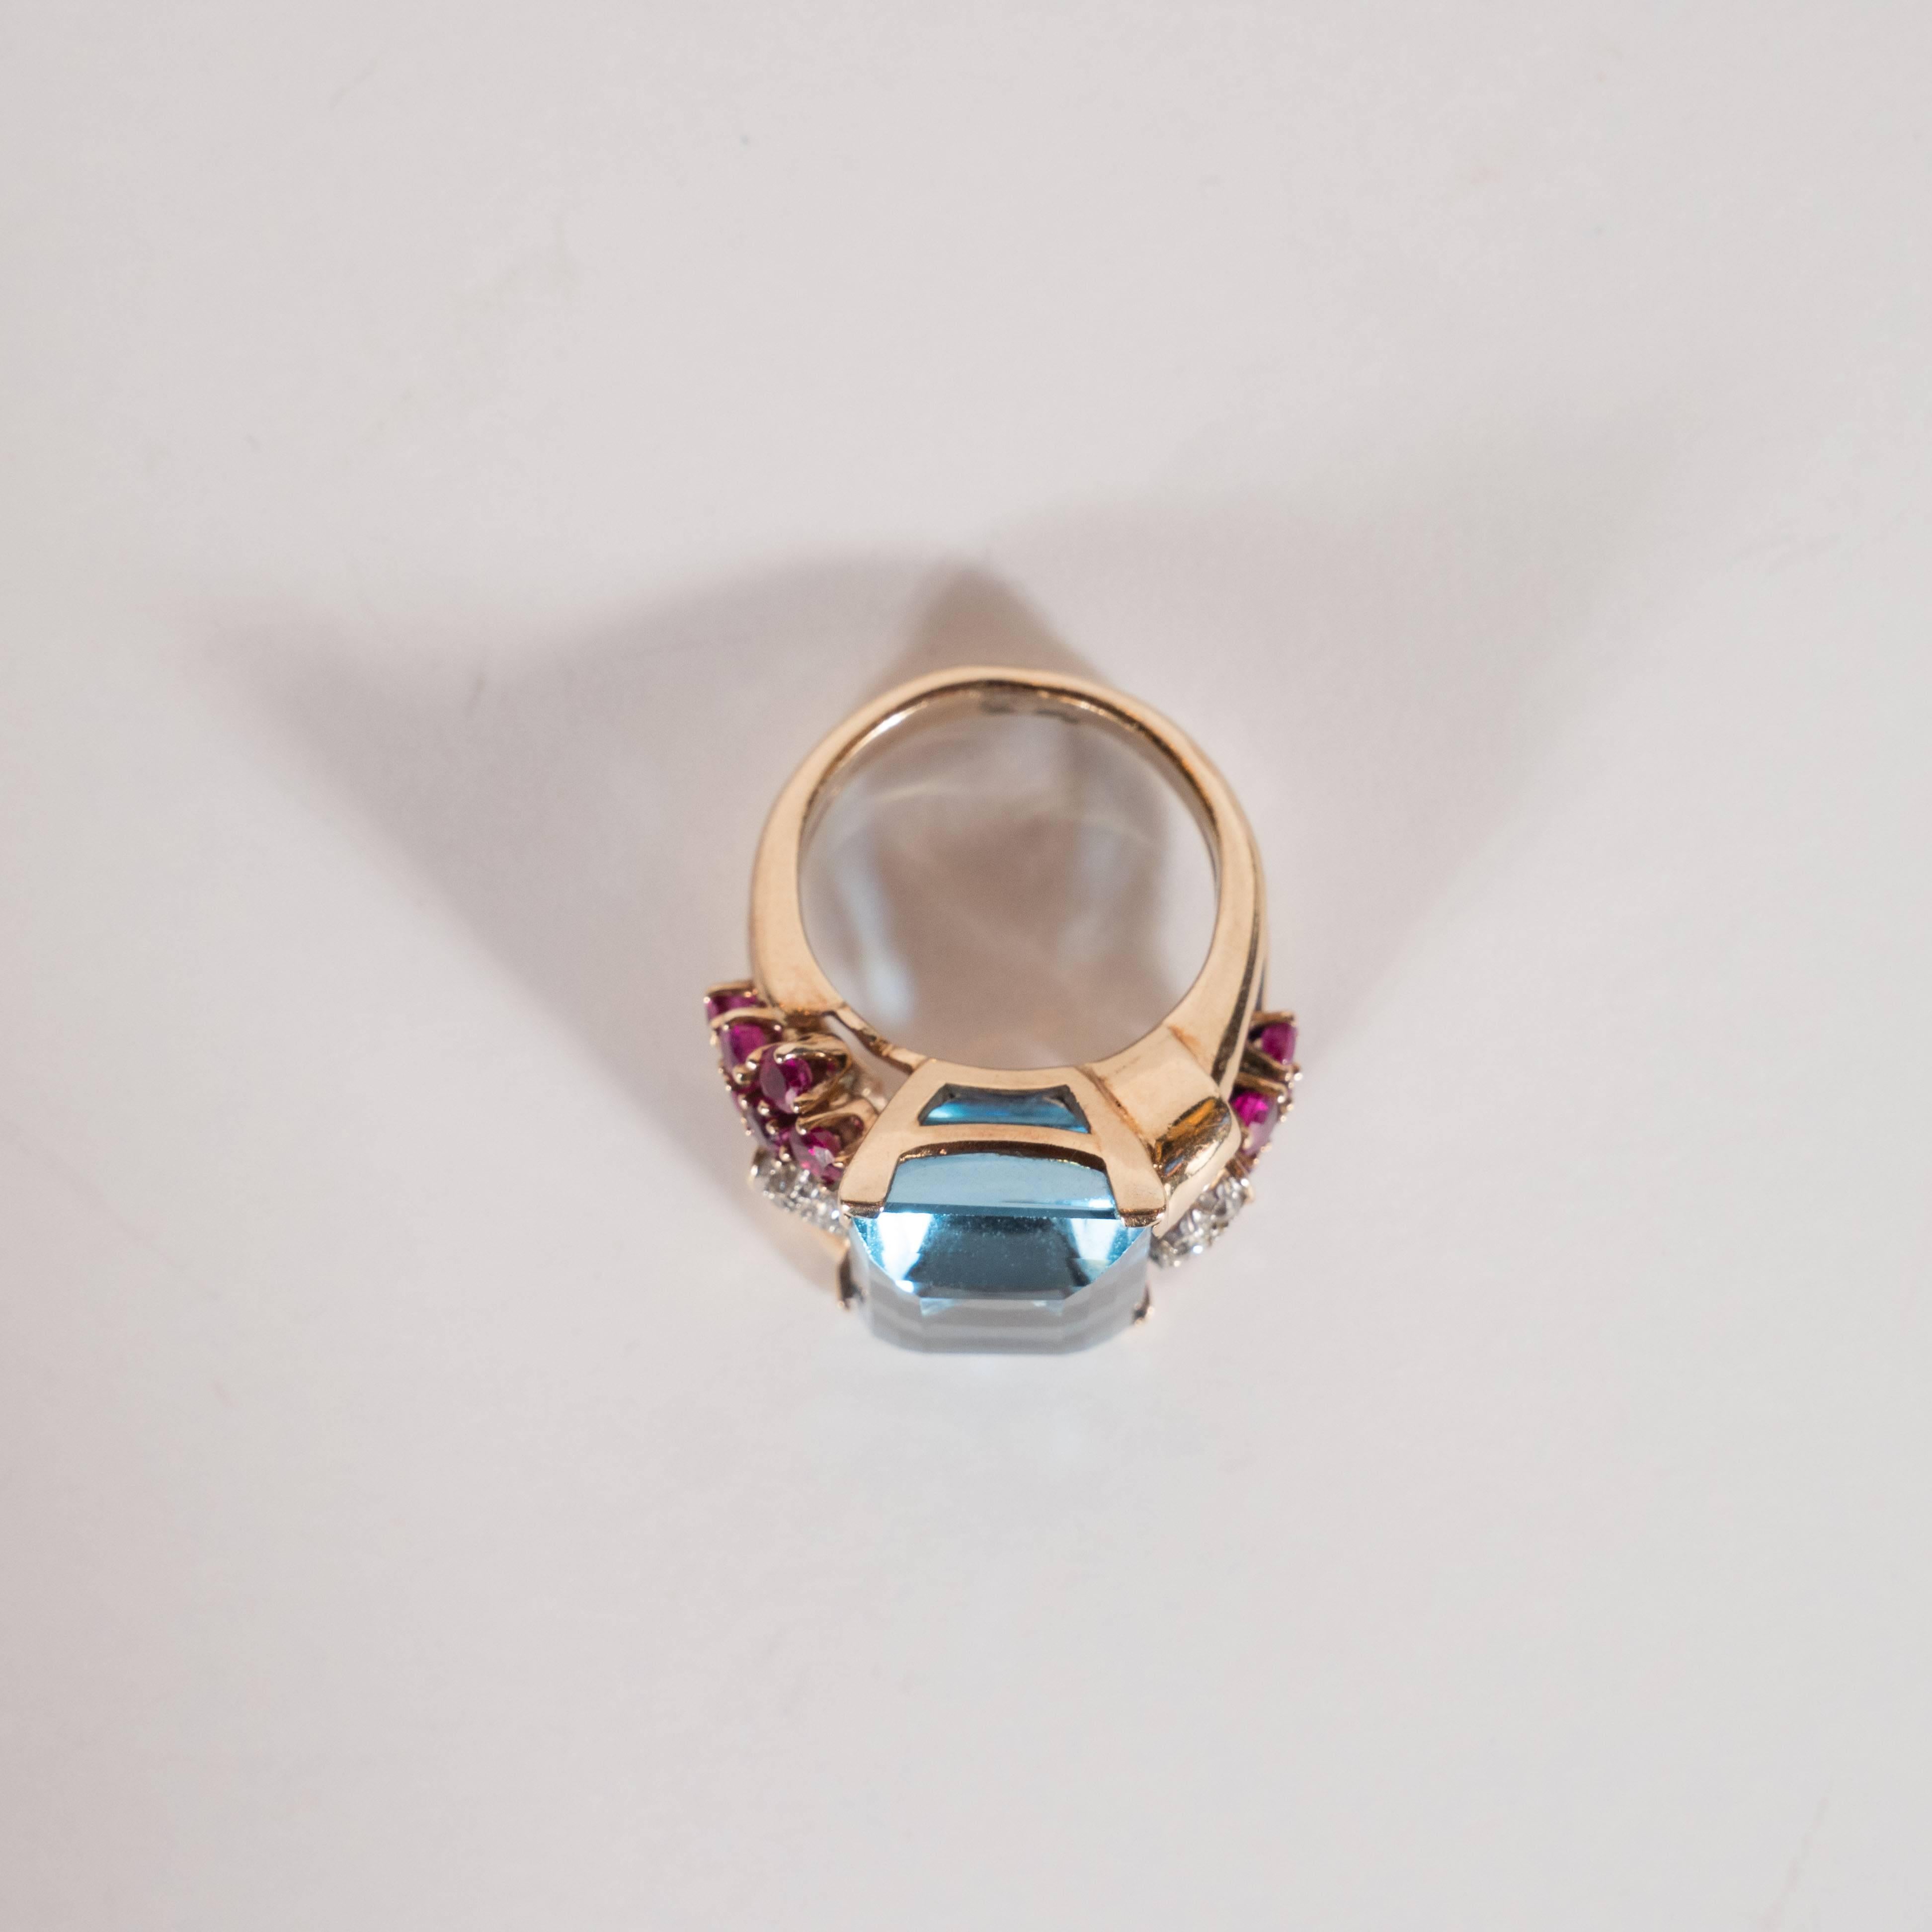 1940s American 8 Carat Acquamarine and 14k Gold Ring with Rubies and Diamonds 3